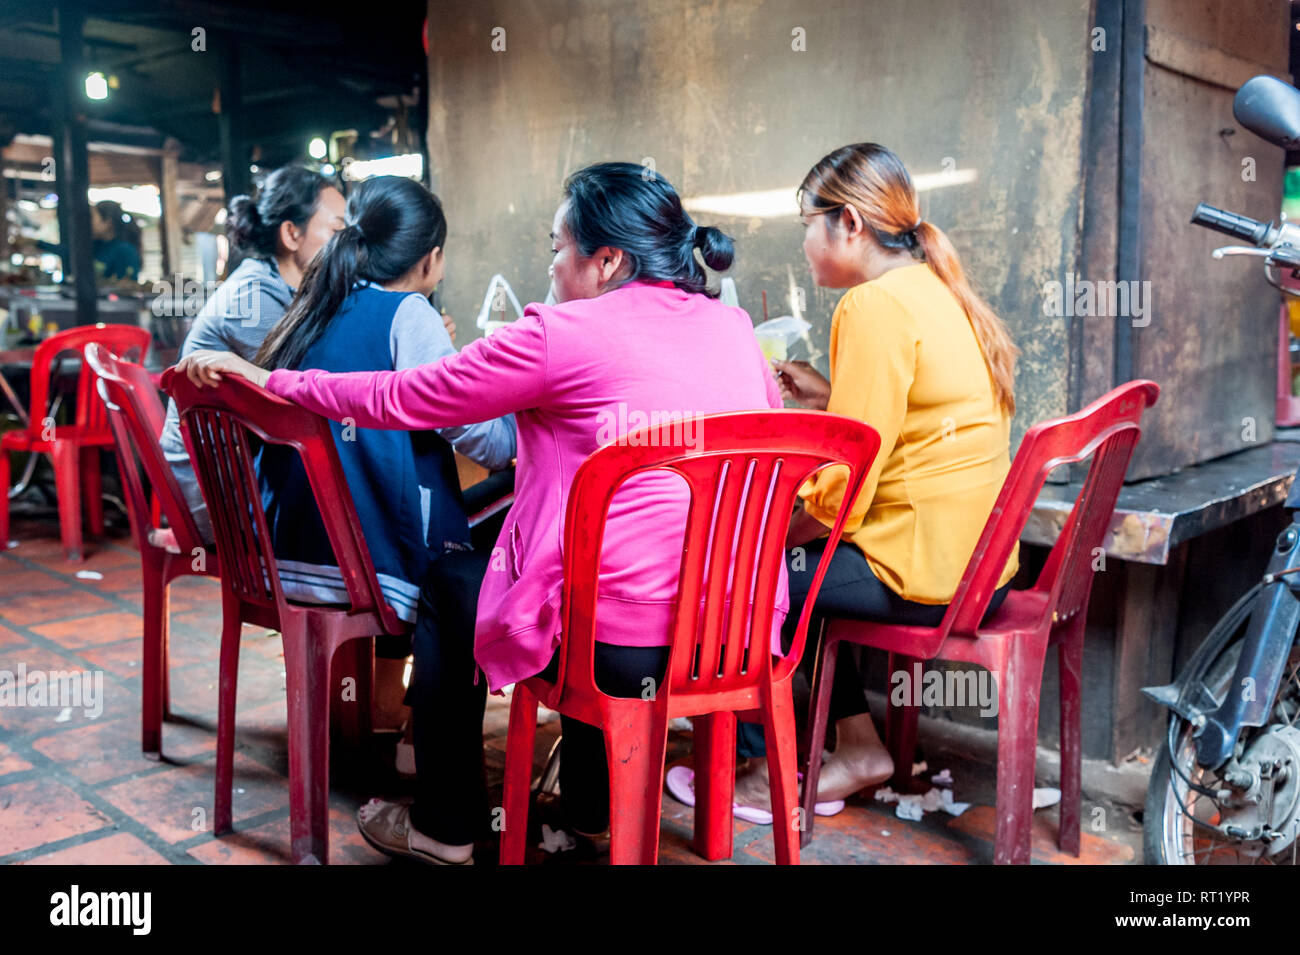 Four friends enjoy noodle and rice dishes in a busy indoor market food stall in Cambodia, Phnom Penh. Stock Photo